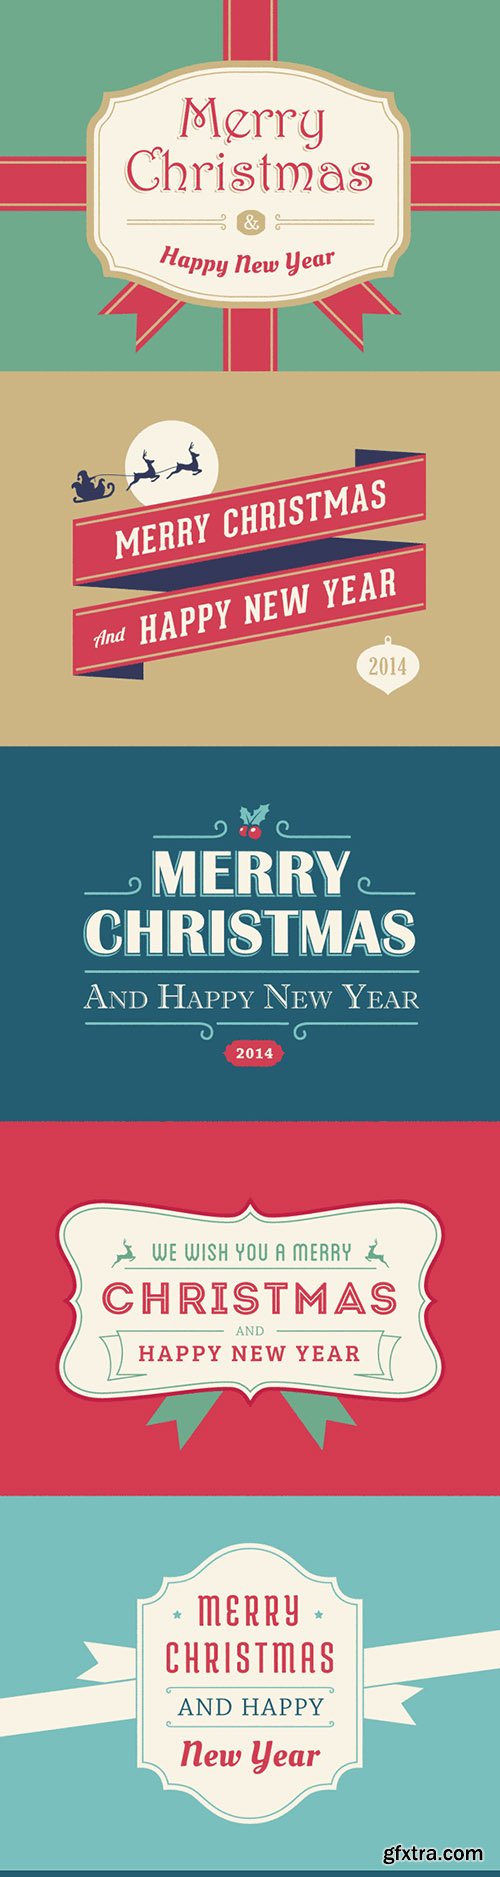 PSD, EPS & AI Source - 5 Christmas And New Year Cards